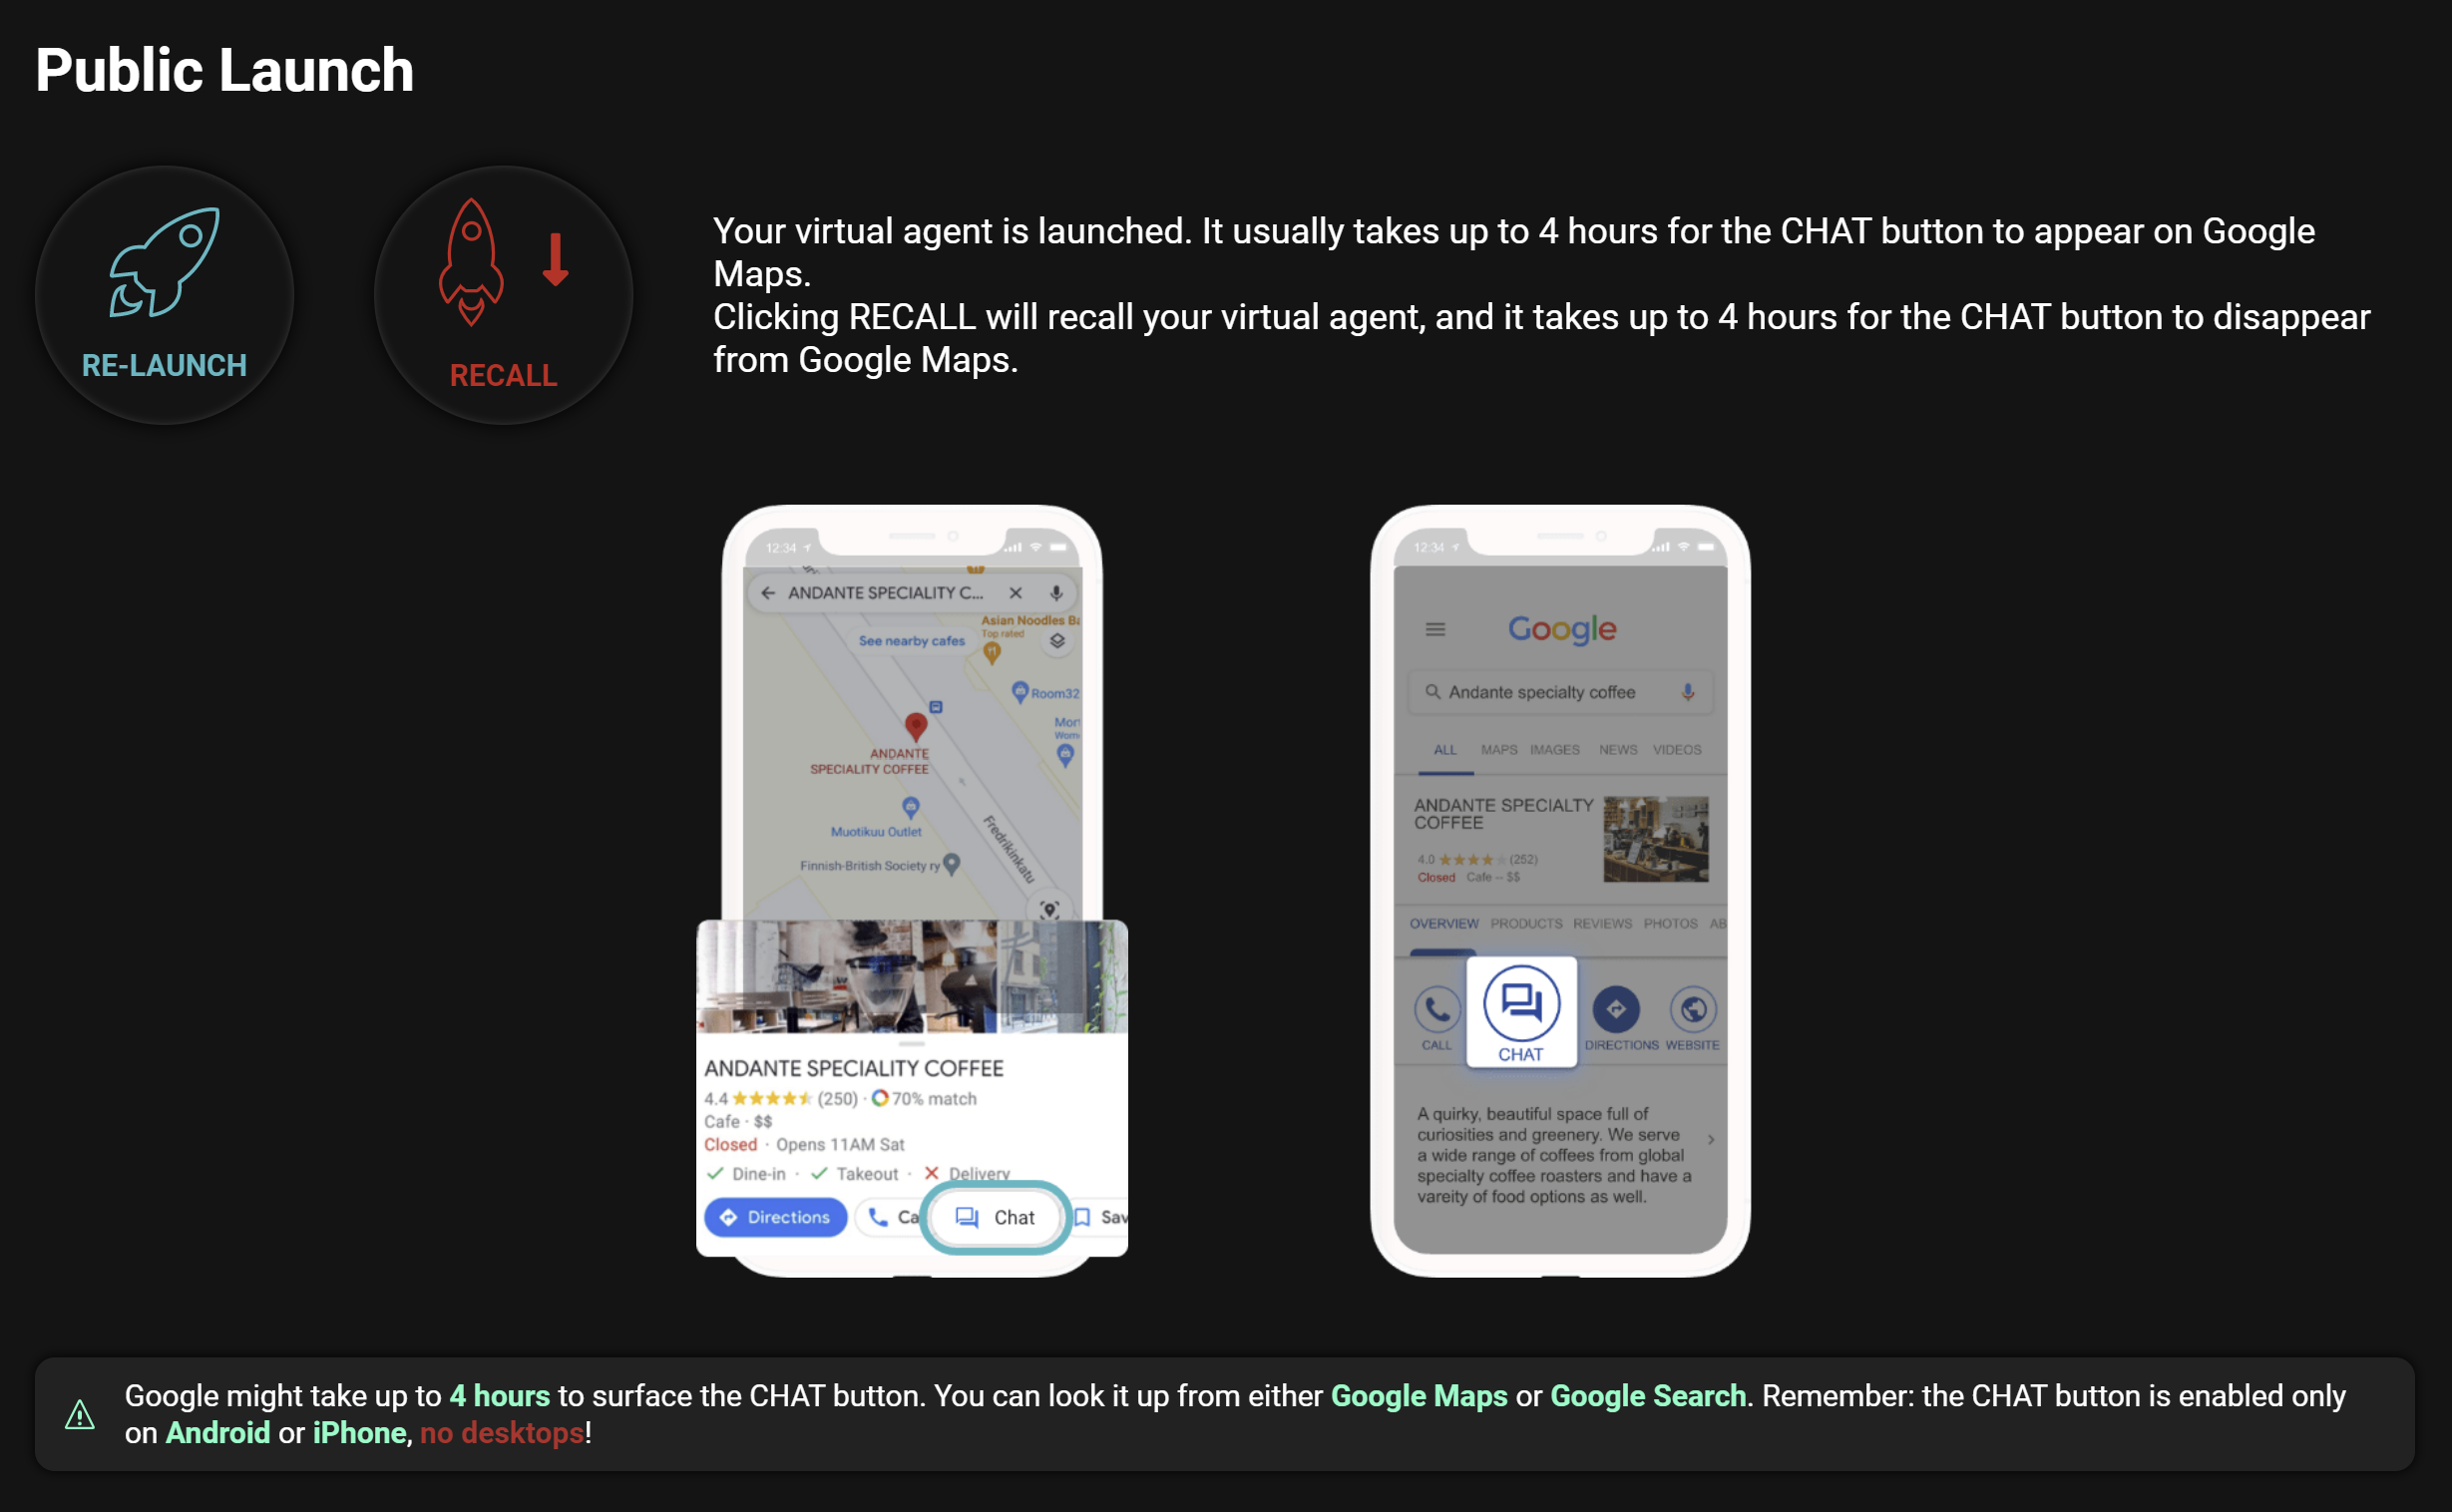 Near Me Messaging integrates Google Business Messages with the chat button on your Google Maps Profile.